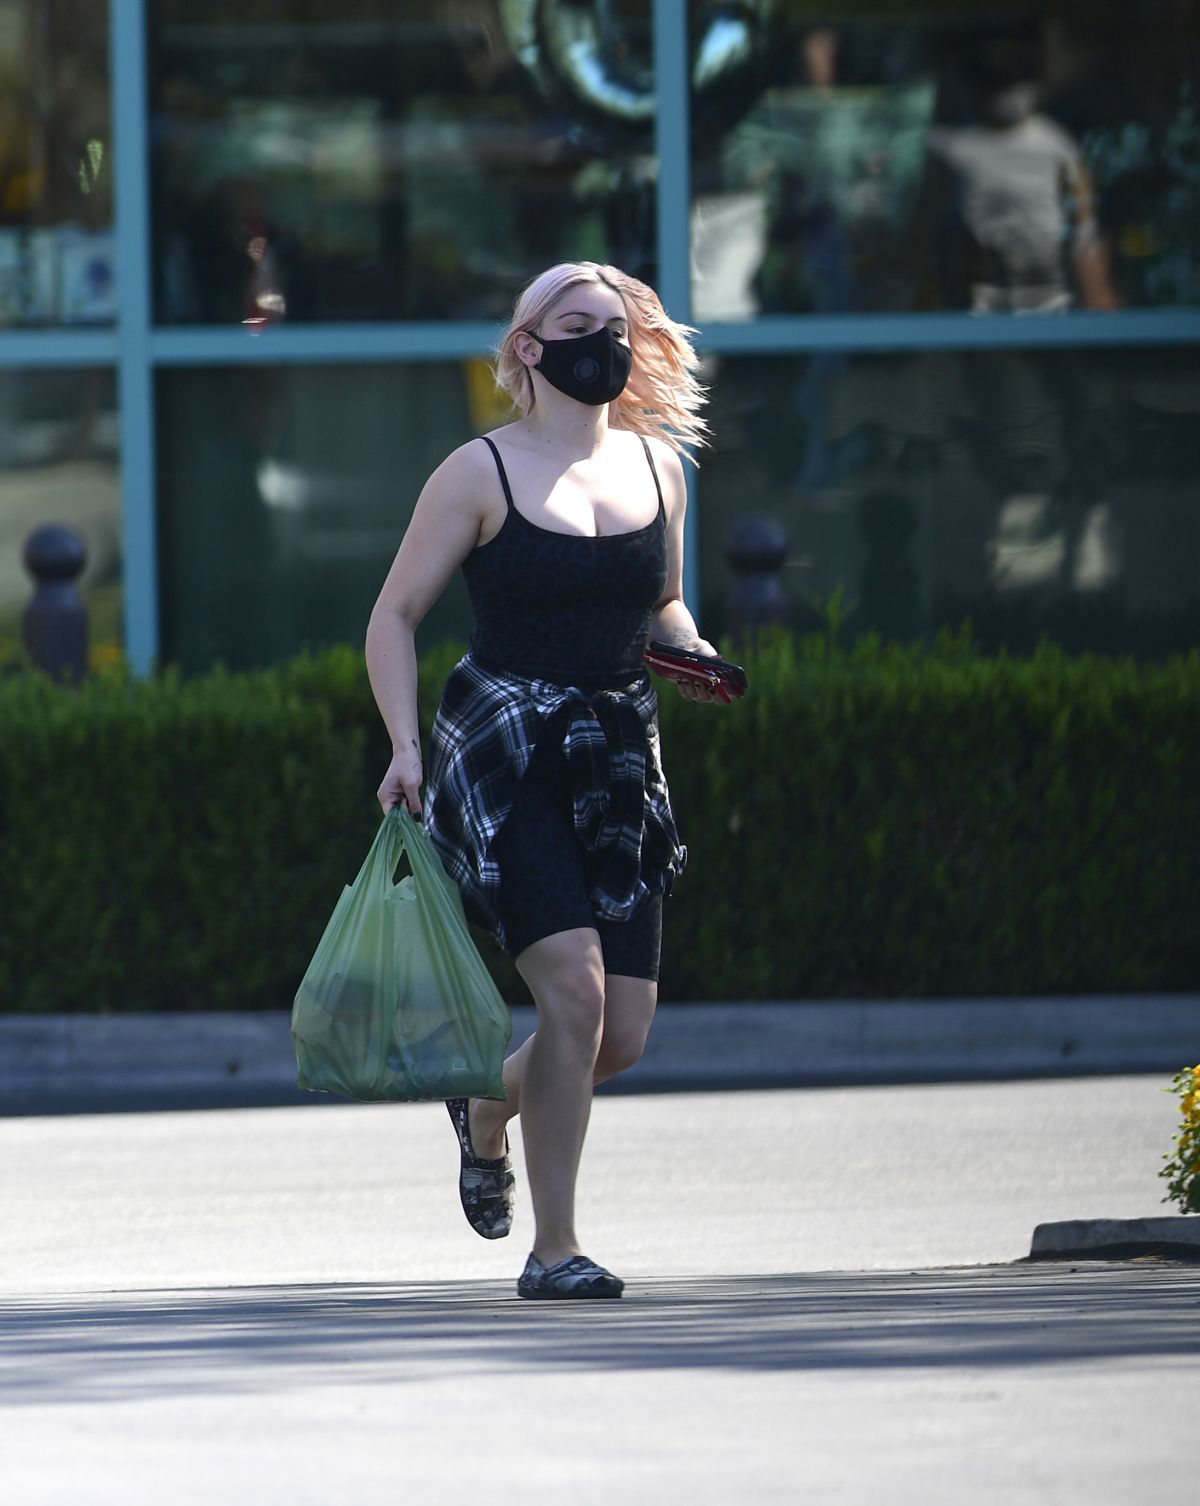 ariel-winter-shopping-for-grocery-in-los-angeles-09-19-2020-8.jpg